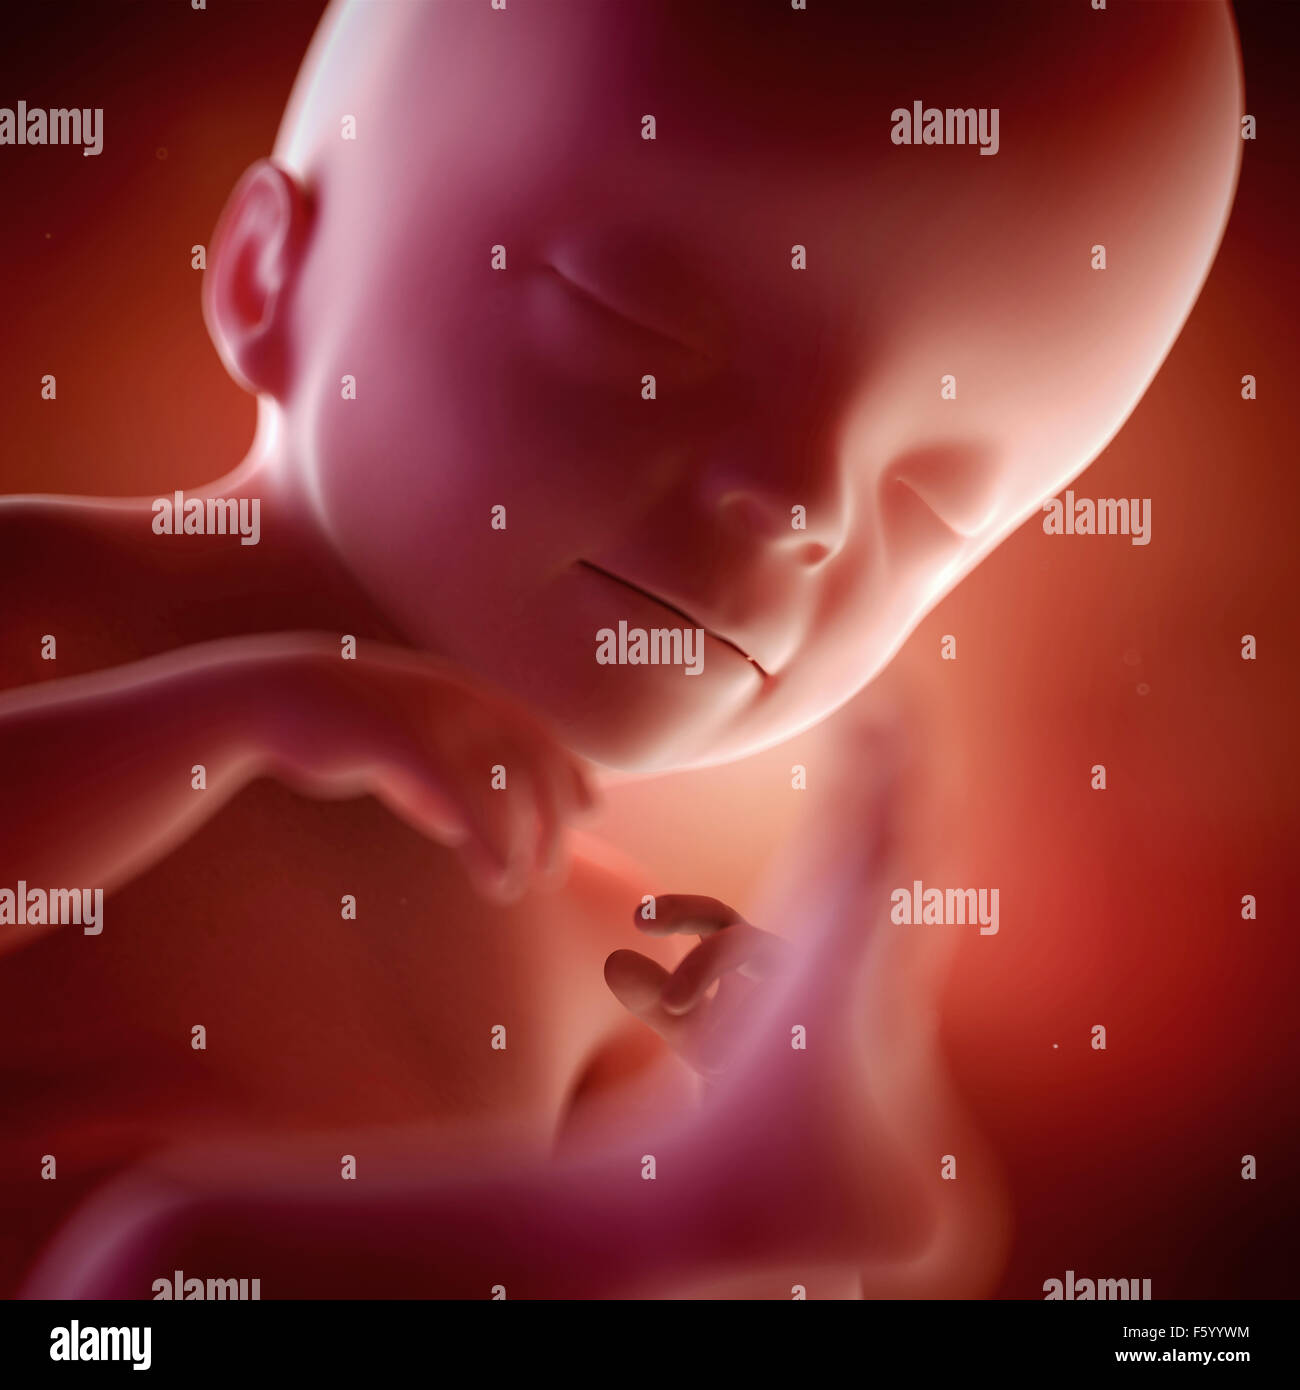 medical accurate 3d illustration of a fetus week 21 Stock Photo